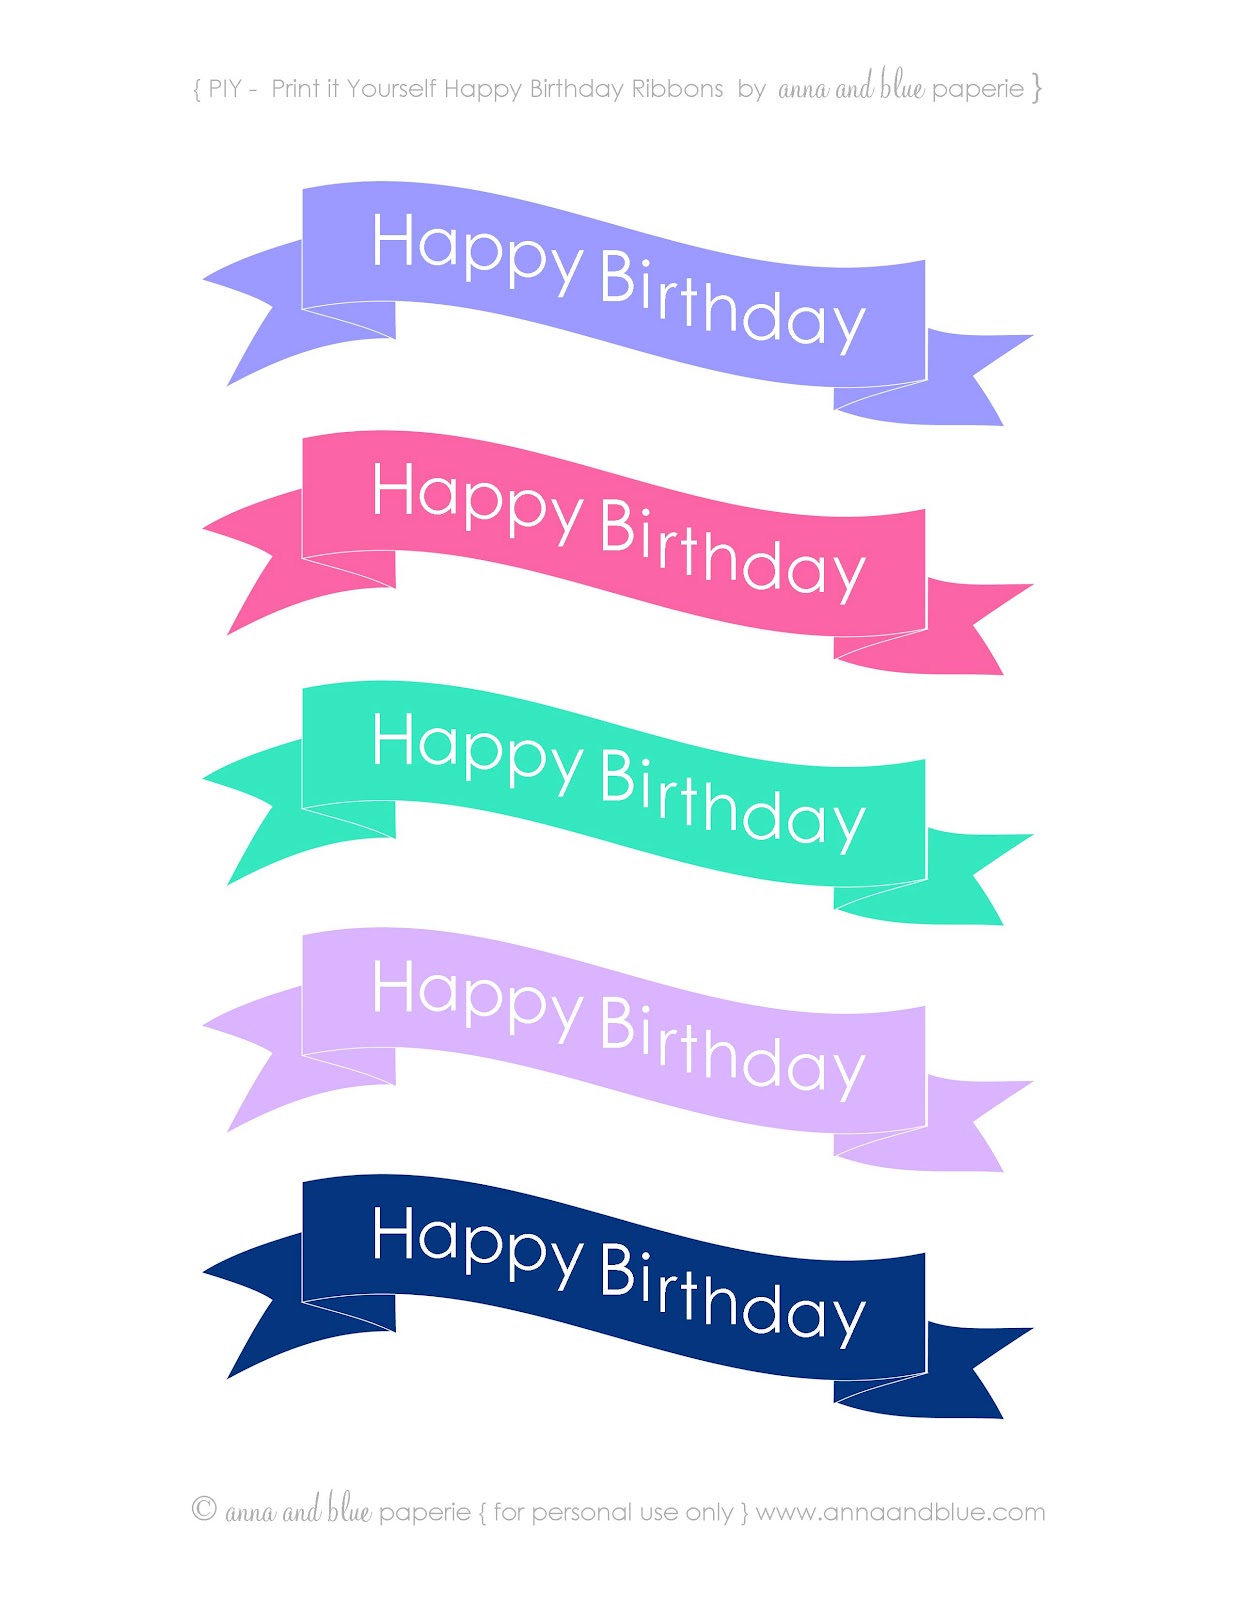 anna and blue paperie {Free Printable} Happy Birthday Cake Banners